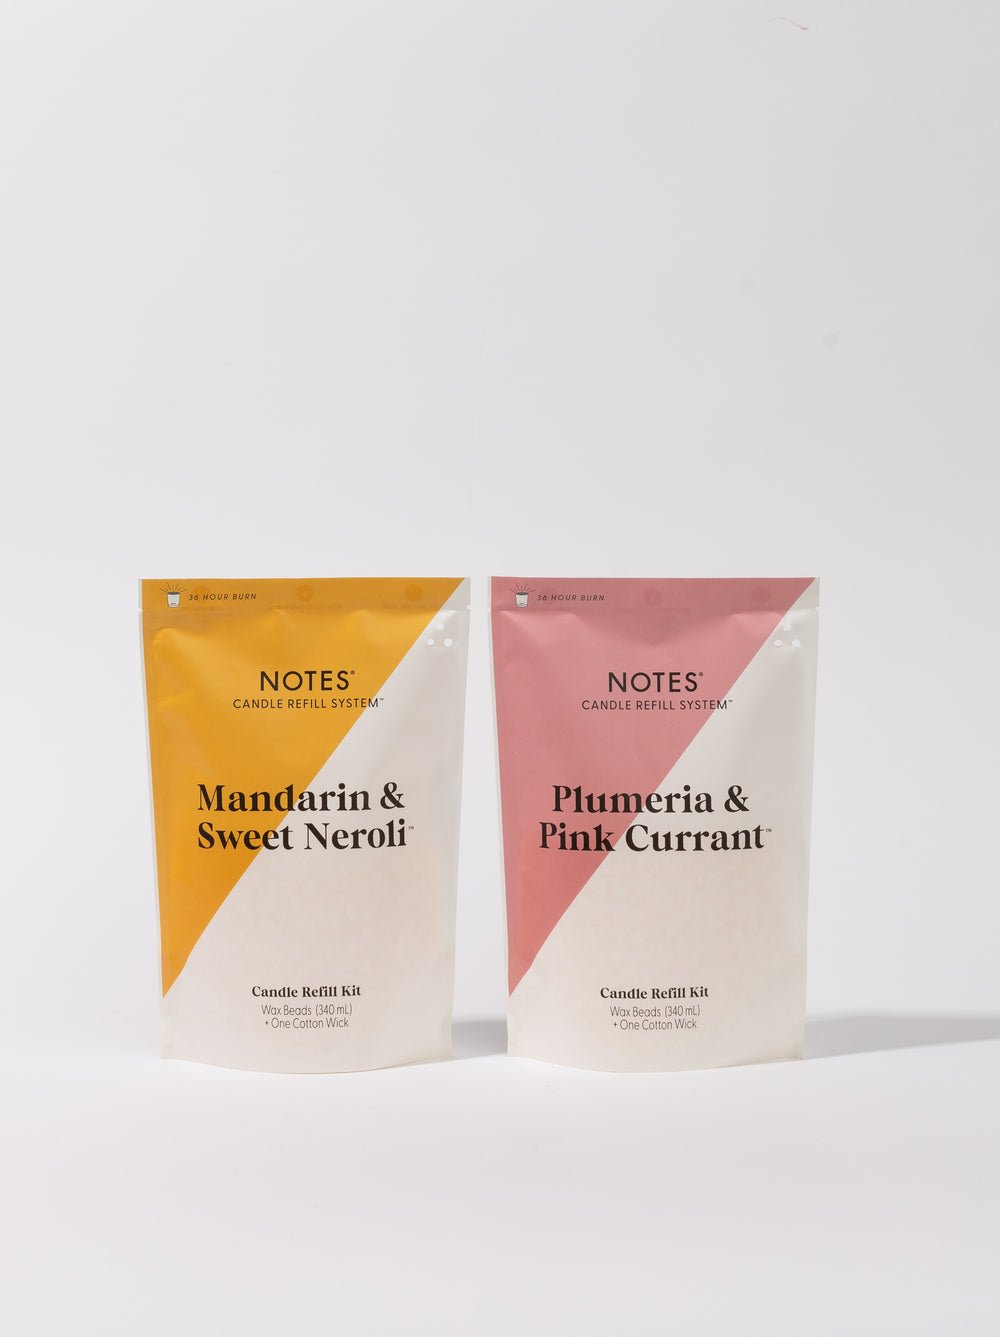 Notes Candle Refill - Violet & White Iris